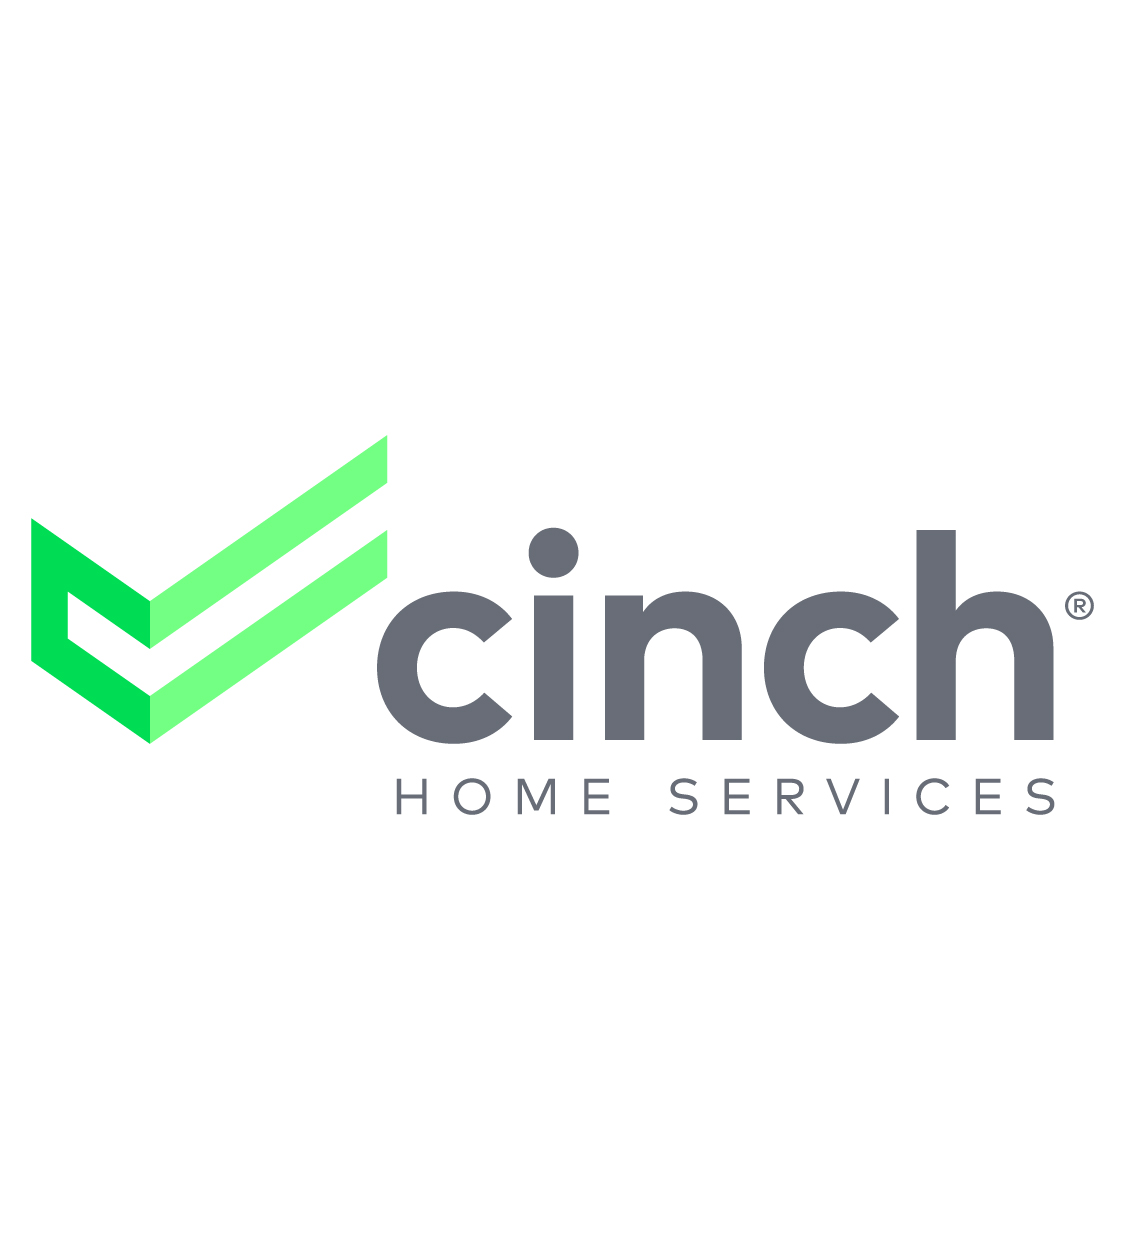 Cinch Home Services celebrates first year under new corporate identity